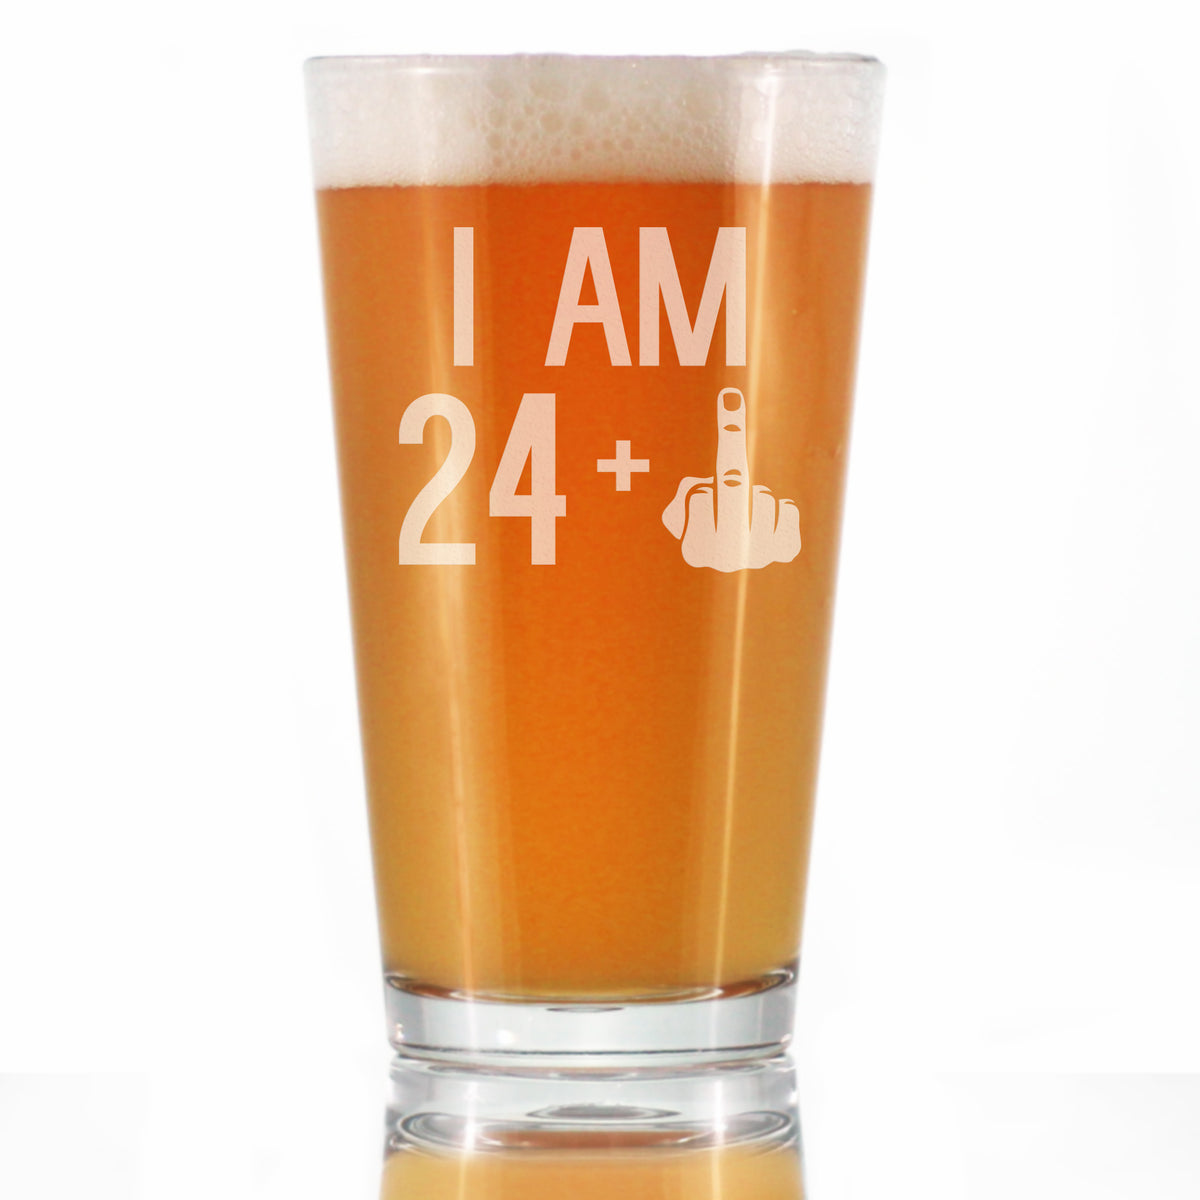 24 + 1 Middle Finger - 16 oz Pint Glass for Beer - Funny 25th Birthday Gifts for Men and Women Turning 25